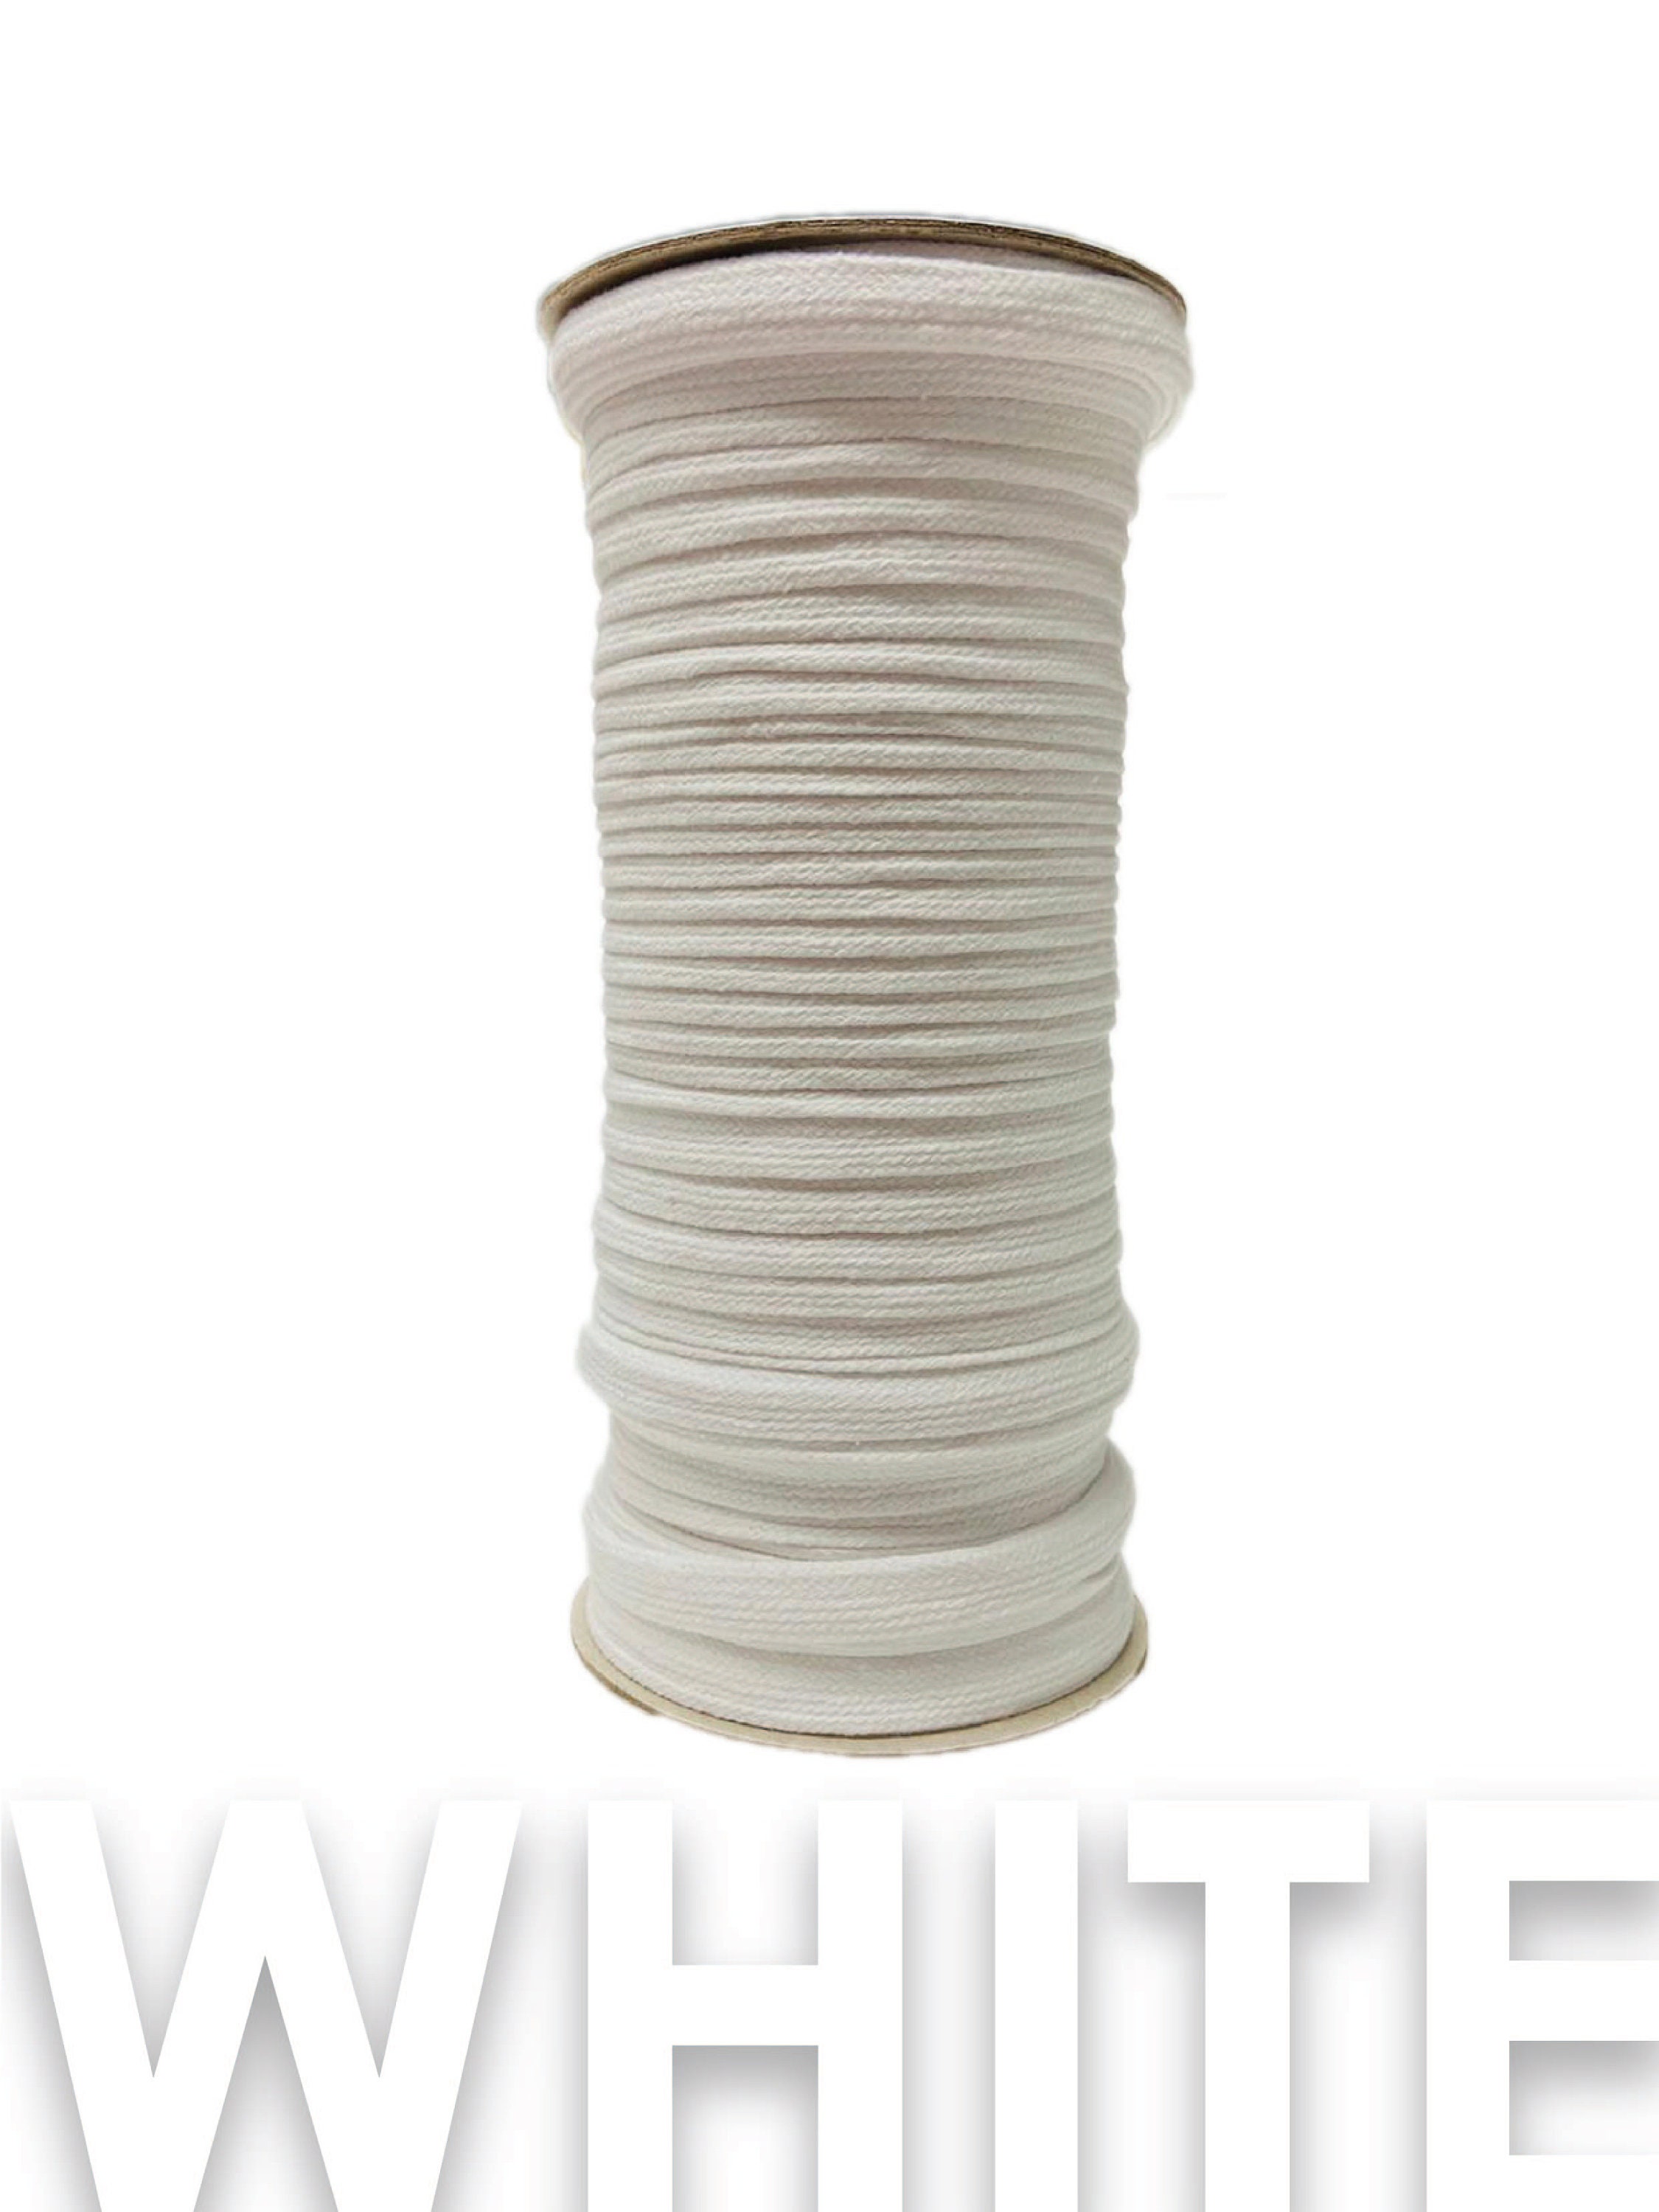 3/8 Cotton Natural Flat Cord for Laces, Drawstrings, and Handles (10 Yards)